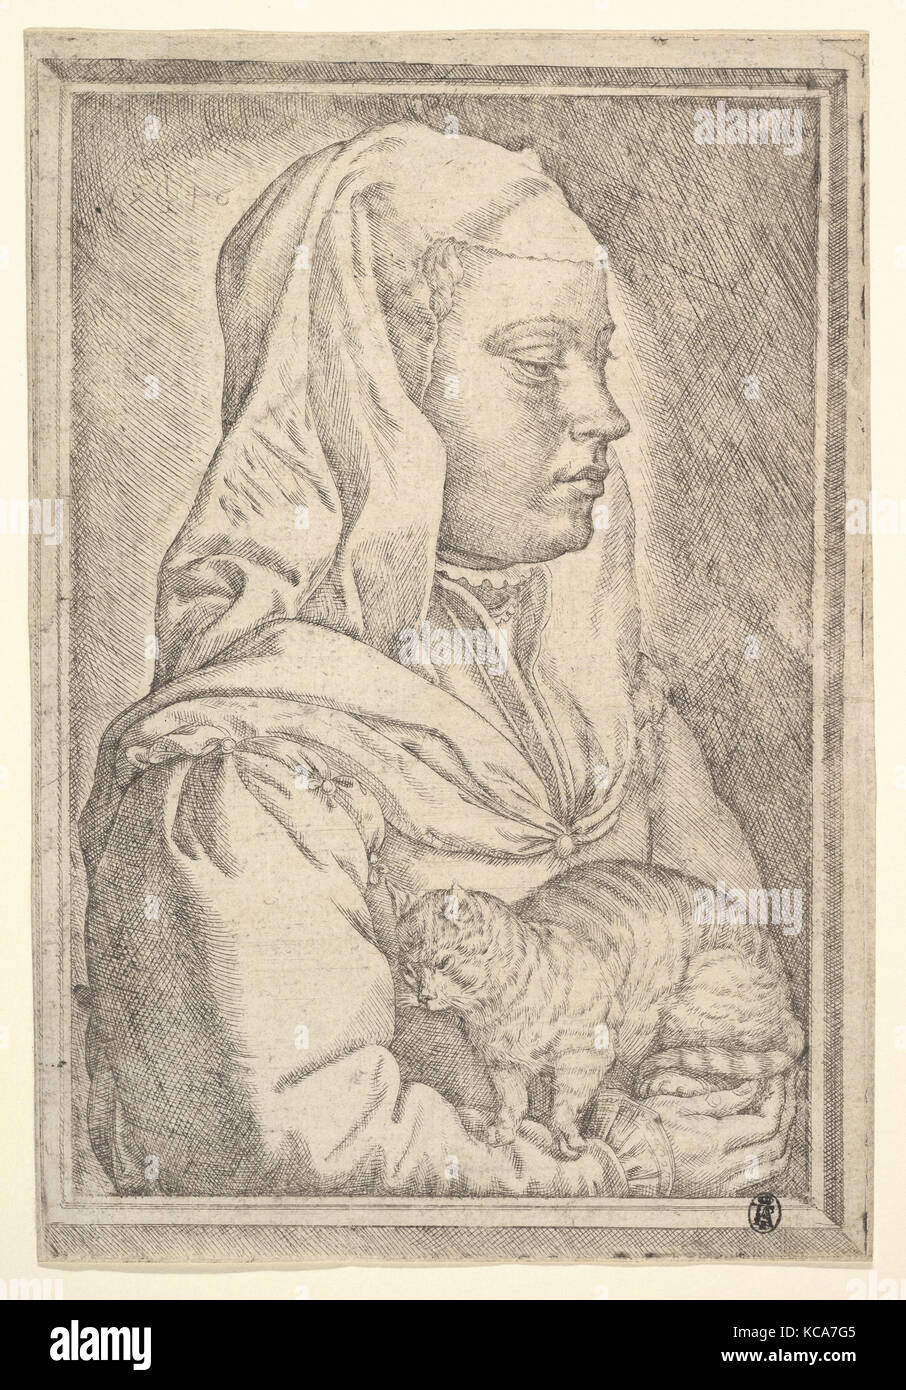 Girl with a Cat, 1545, Etching with engraving, plate 8-3/4 x 5-7/8 in. (22.2 x 15 cm), Prints, Jan Cornelisz Vermeyen Stock Photo